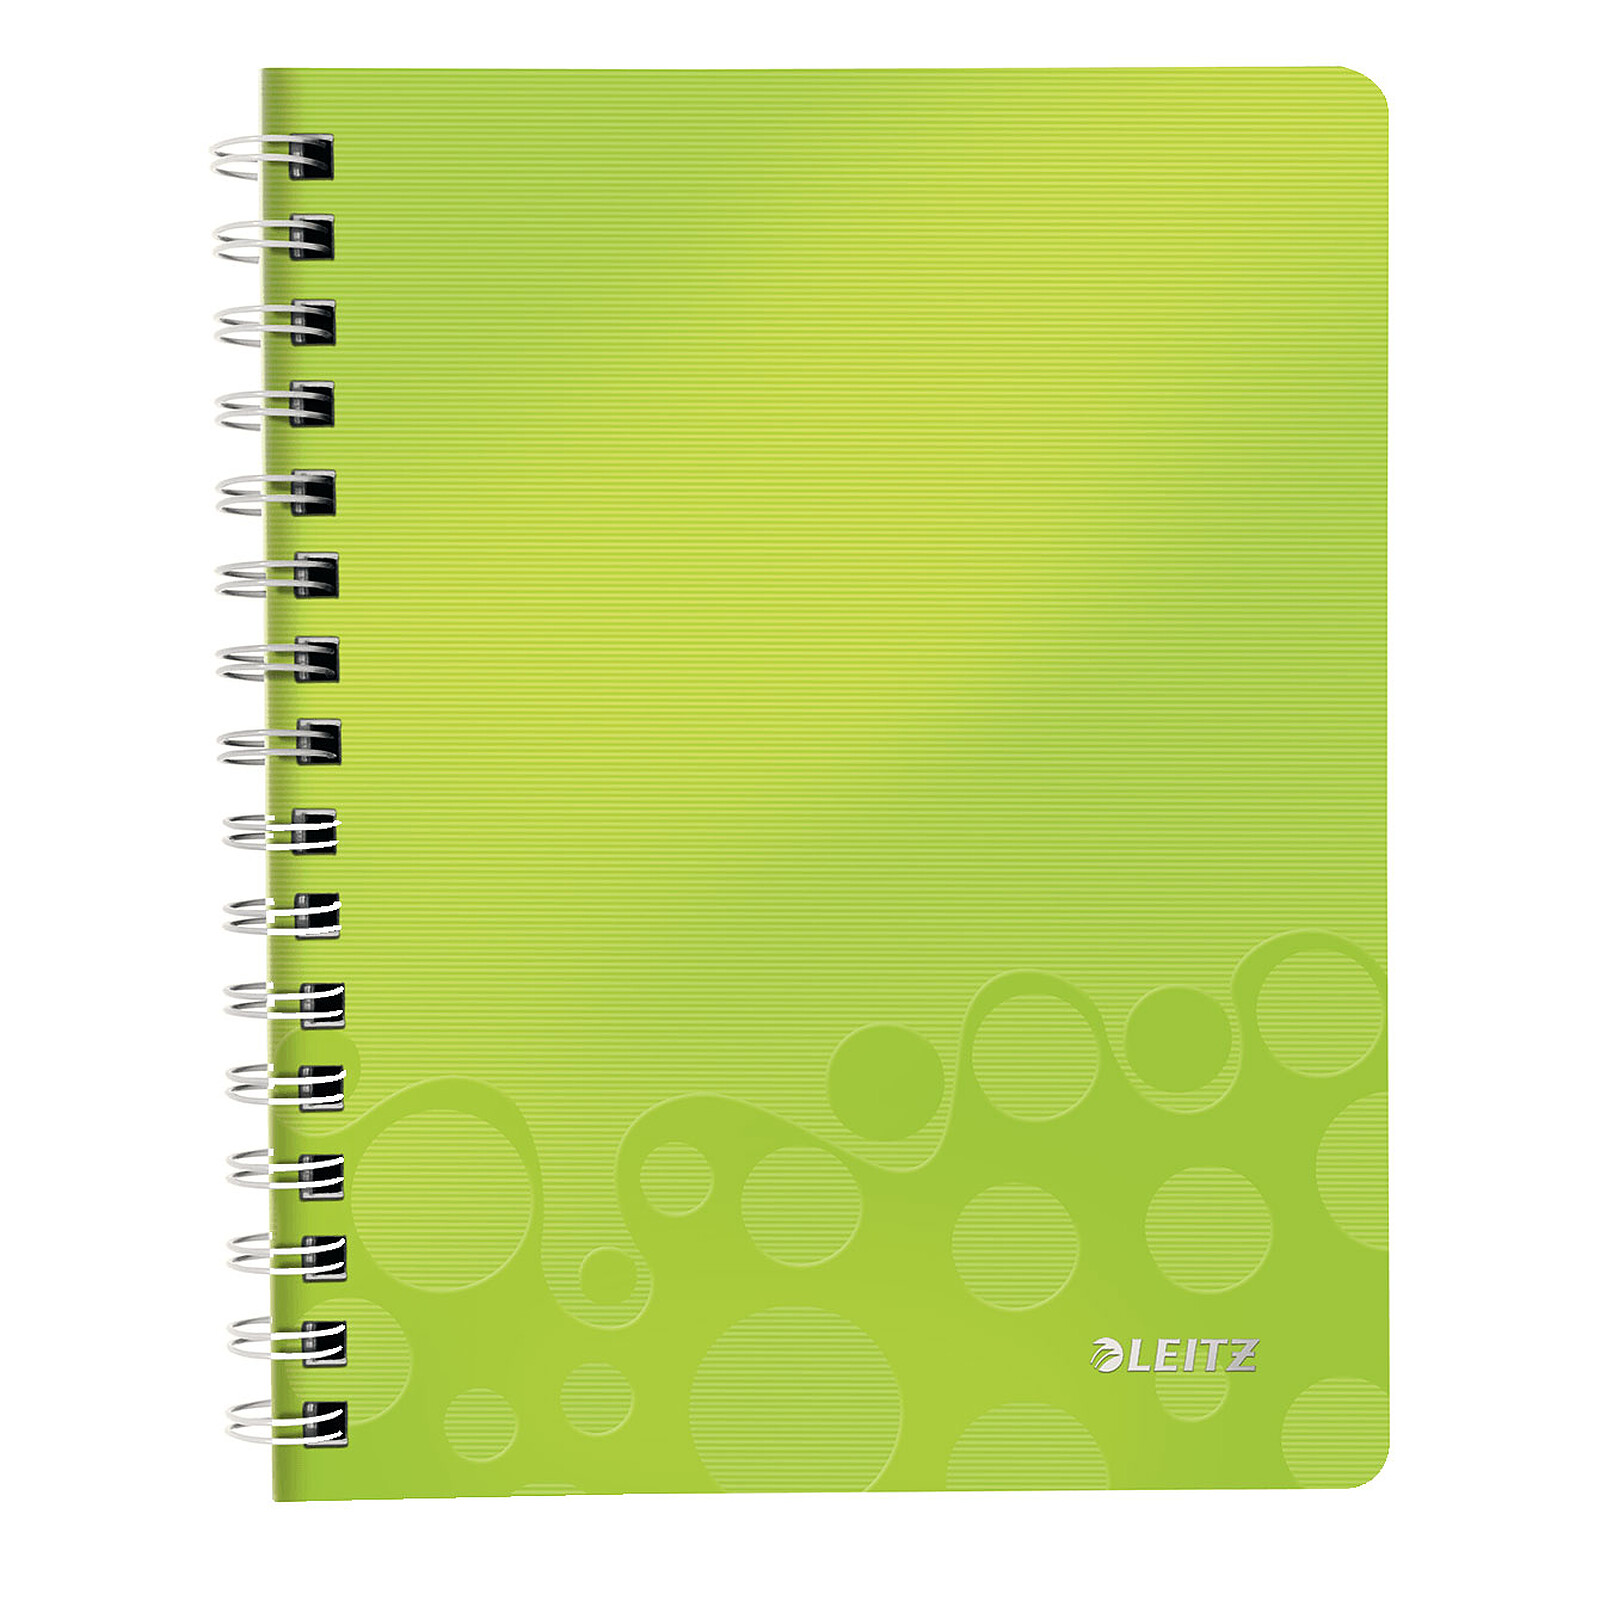 Recharge cahier - Format A5 14.8 x 21 cm - Exabook - Rhodia - 160